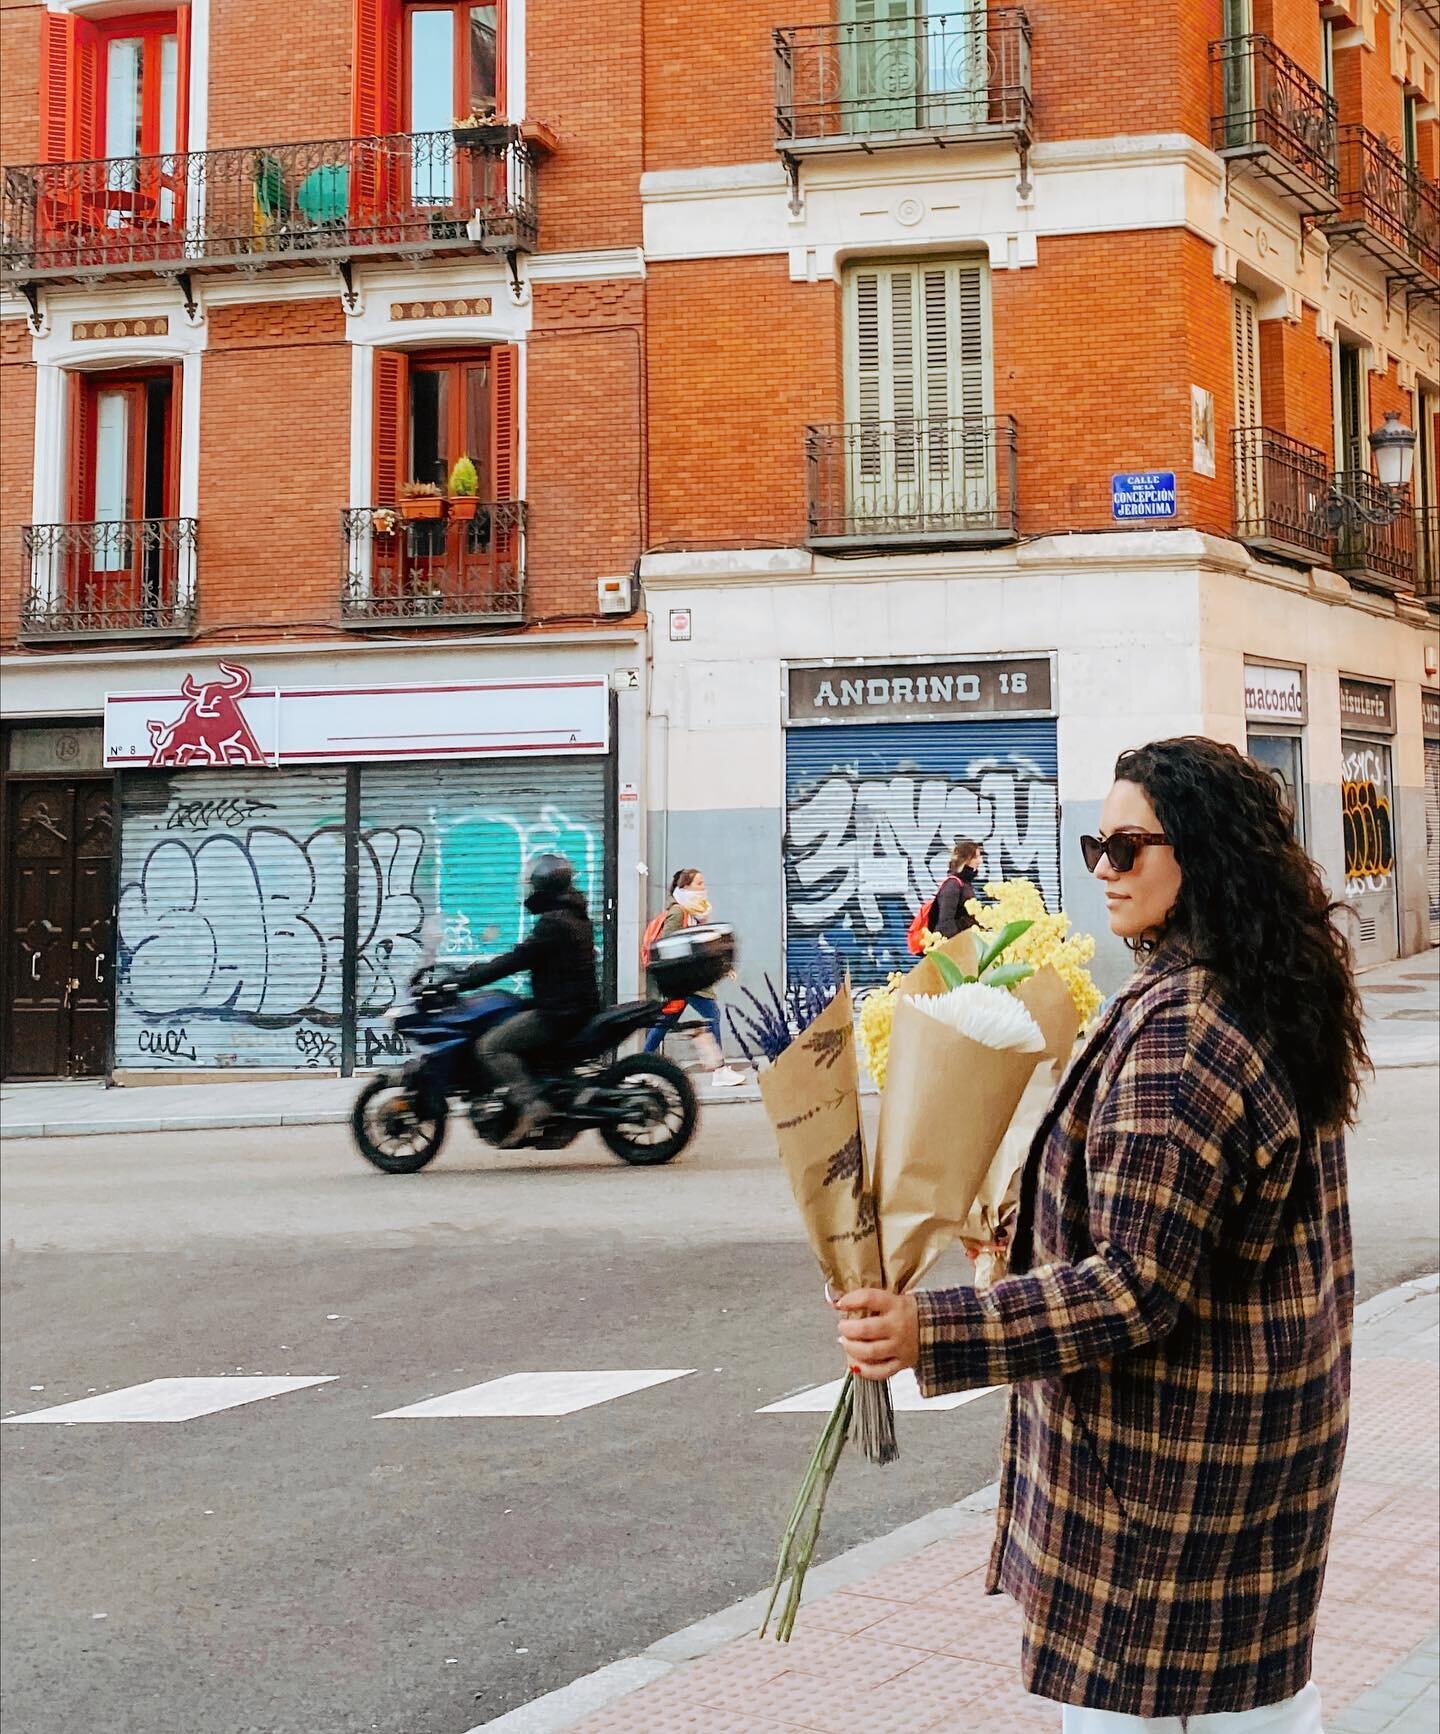 what a day. what a month. what a life. what a world. 🫀🗝 🧡

#getlost #explorer #wander #exploretocreate #roamtheplanet #madrid #madridspain #exploremadrid #explorespain #viewfromabove #cars #movingcities #theprettycities #spanishflag🇪🇸 #espa&ntil